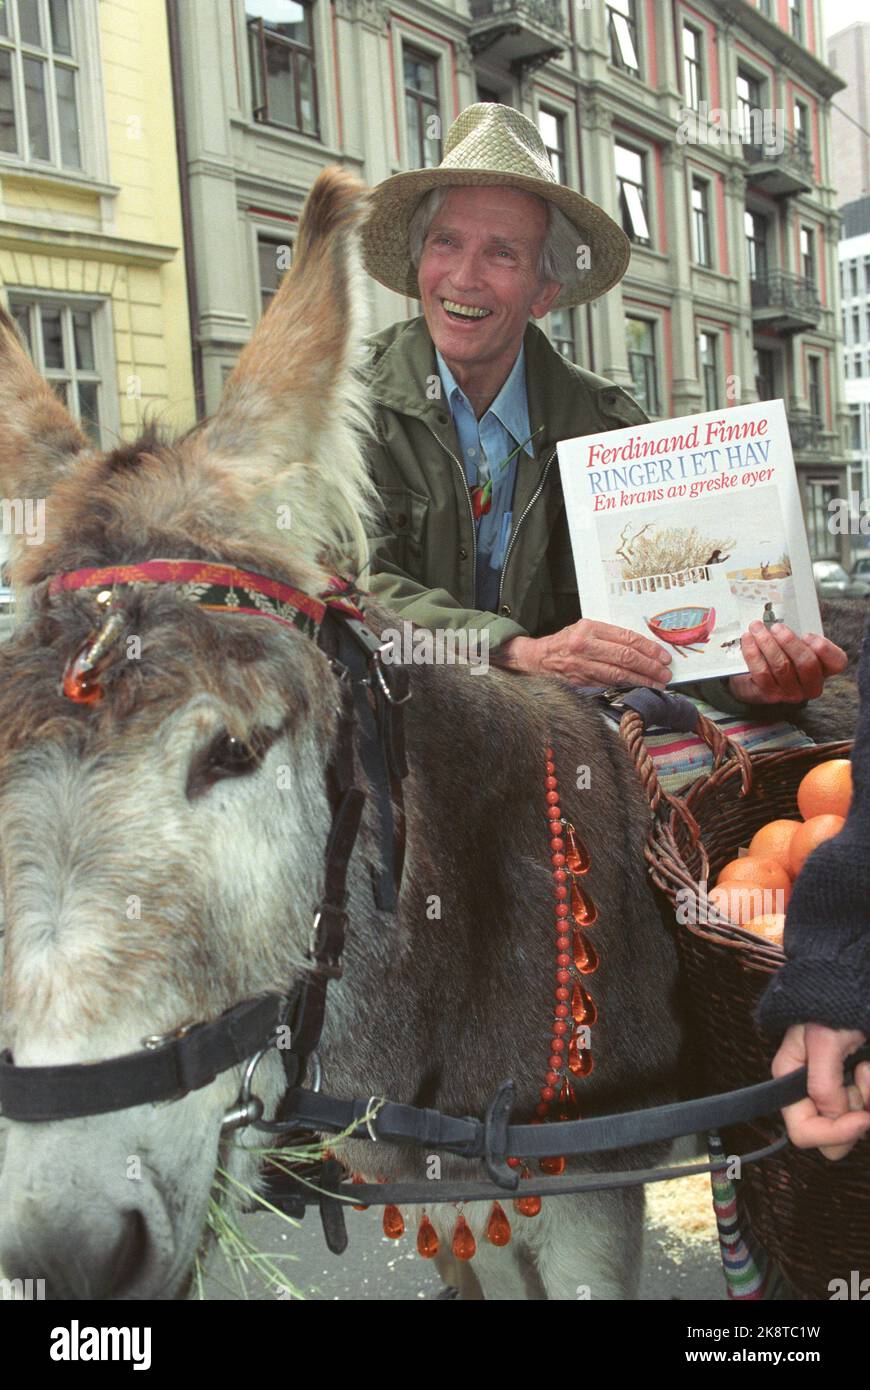 Oslo 19911015 - painter and author Ferdinand Finne presents his new book 'Ringer in a Sea'. Here along with a party -decorated donkey. Photo: Bjørn Sigurdsøn / NTB Stock Photo